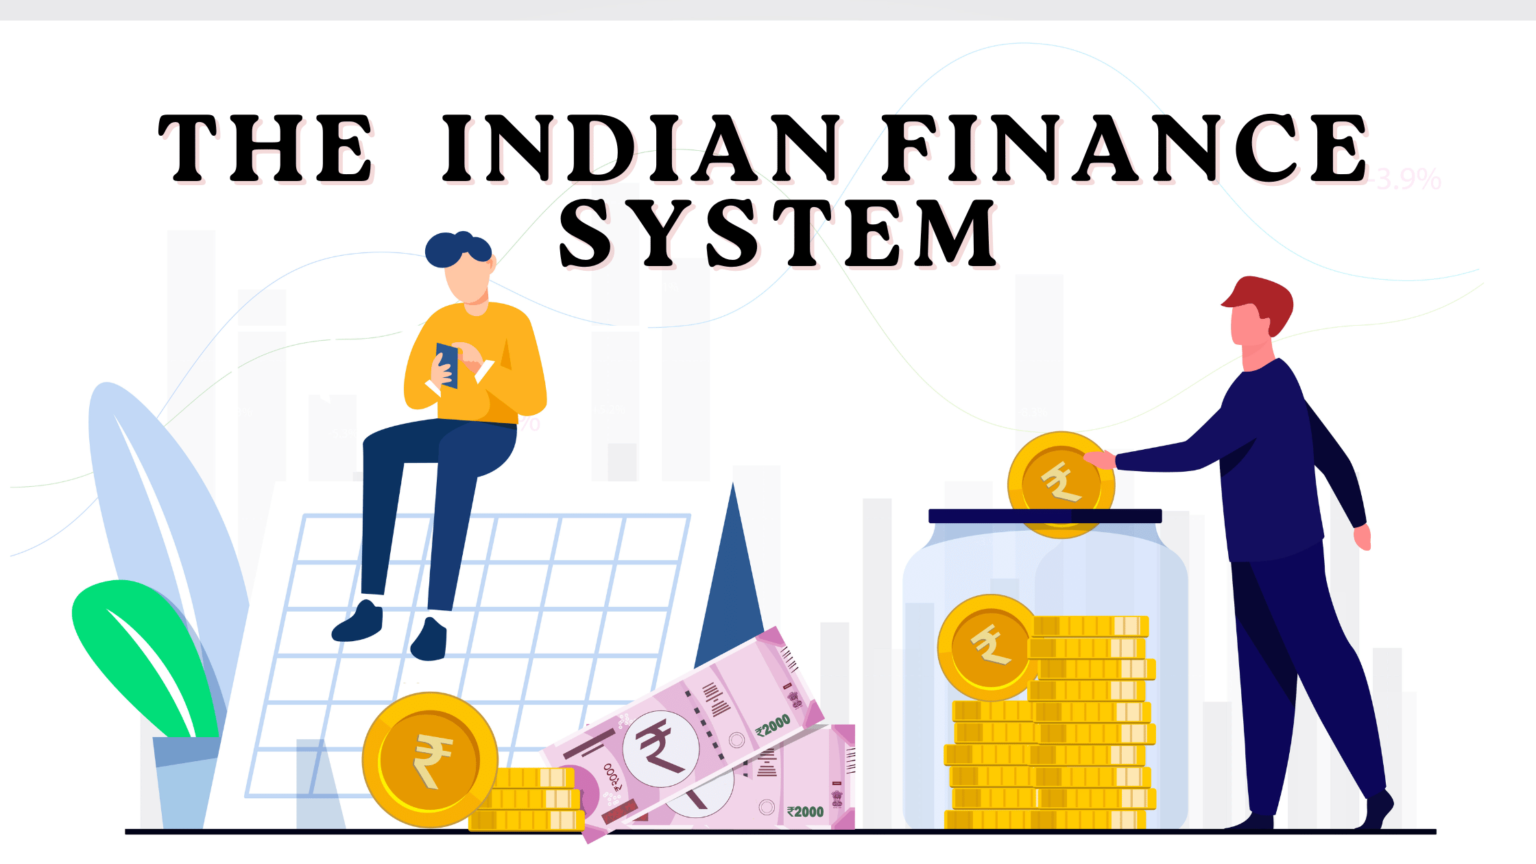 The Indian Finance System